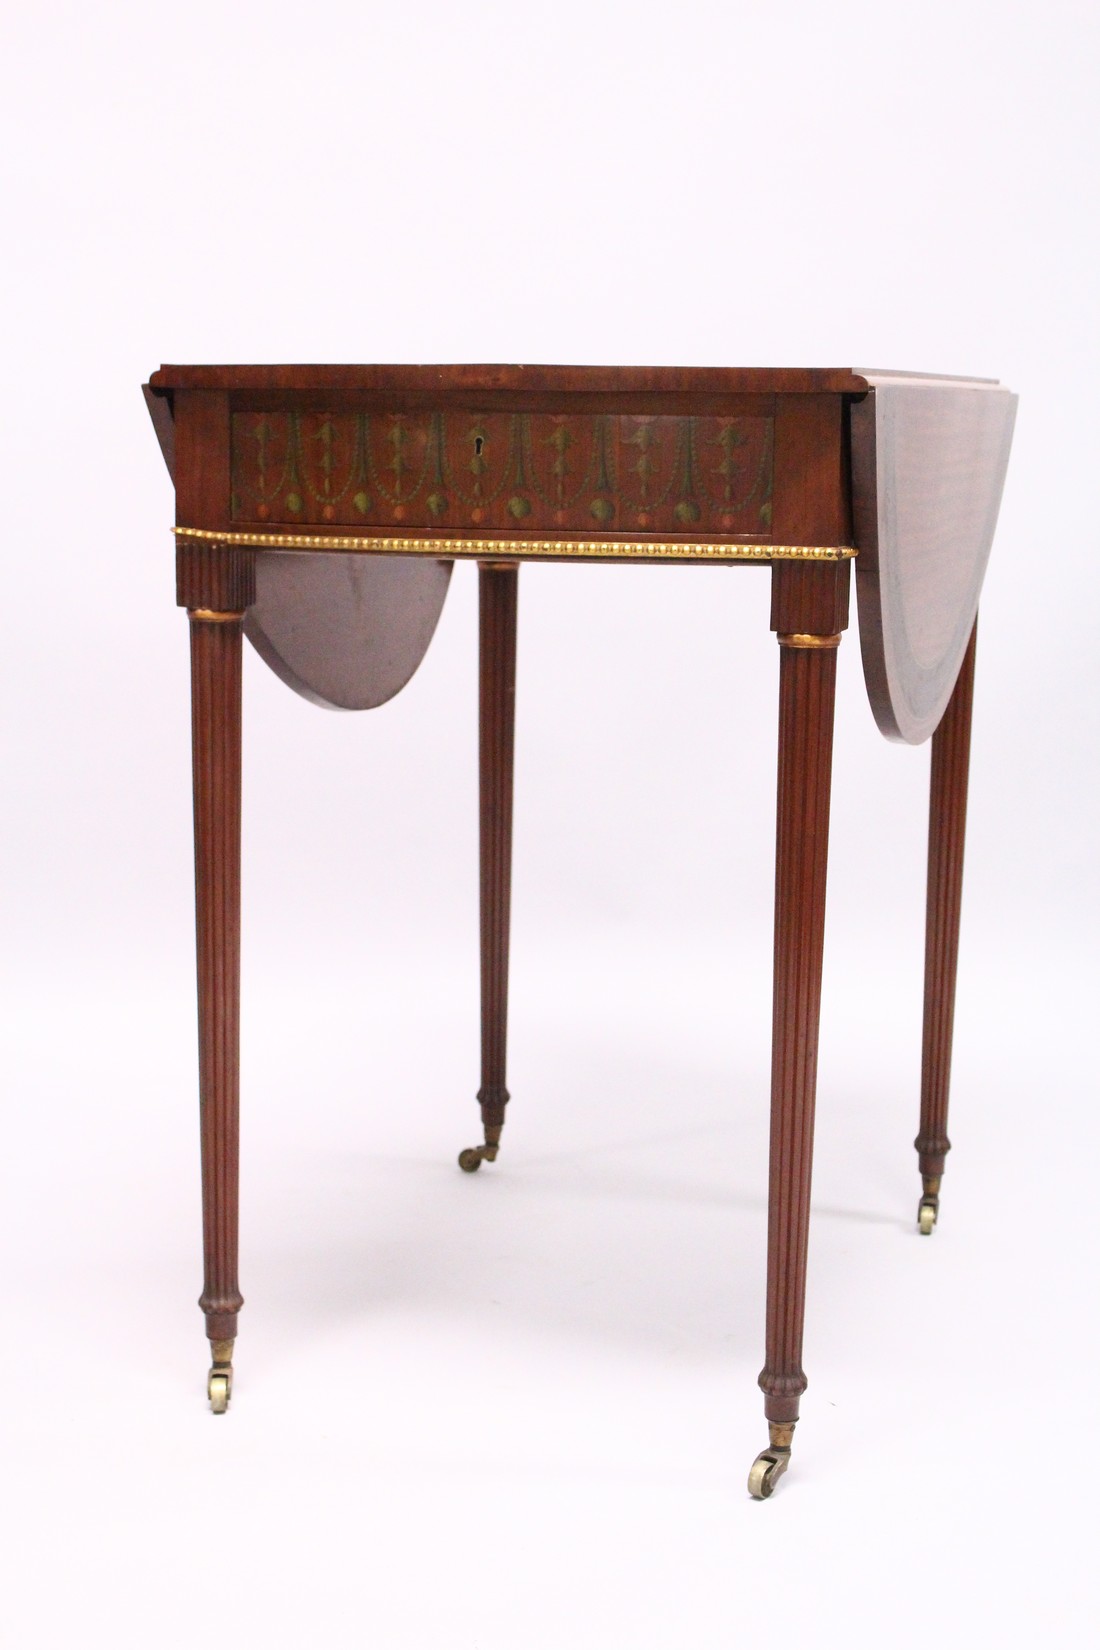 A VERY GOOD EDWARDIAN MAHOGANY AND PAINTED PEMBROOKE TABLE, PROBABLY GILLOW, the oval top painted - Image 2 of 17